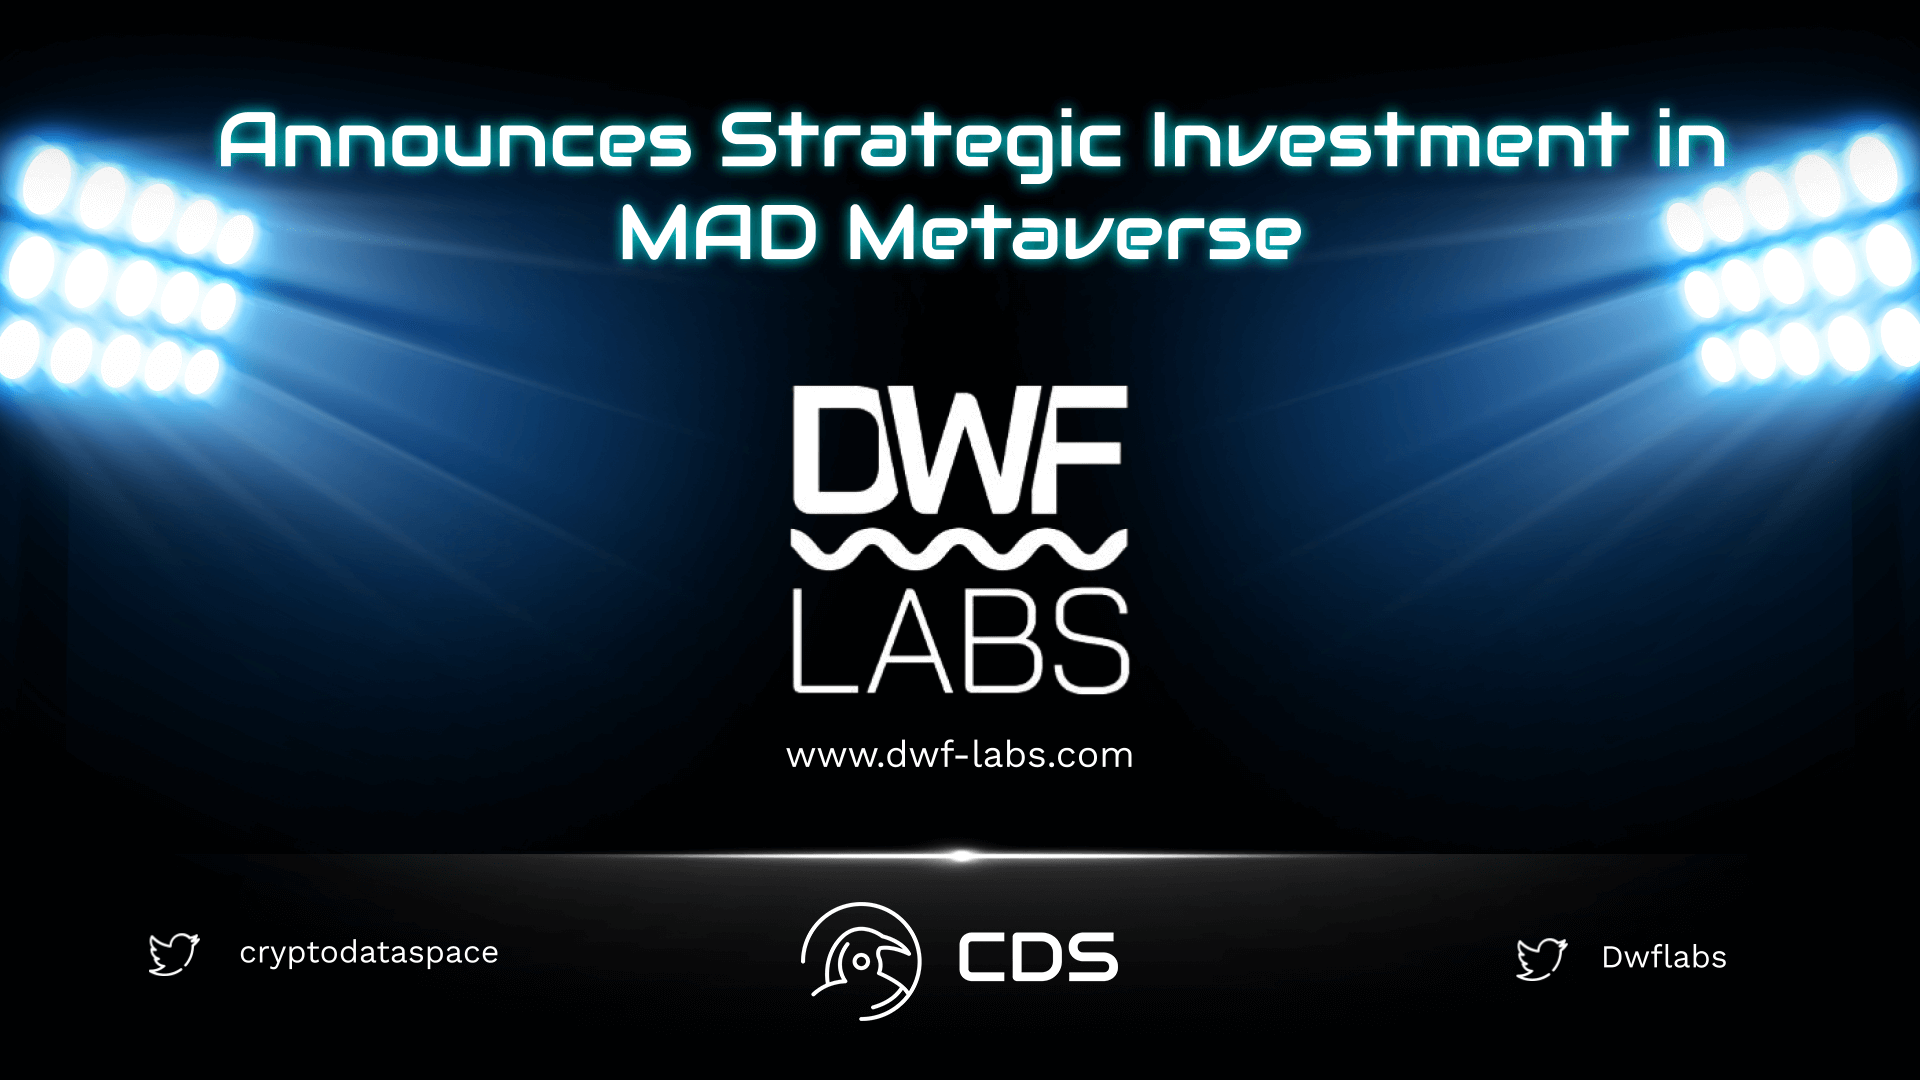 DWF Labs Announces Strategic Investment in MAD Metaverse